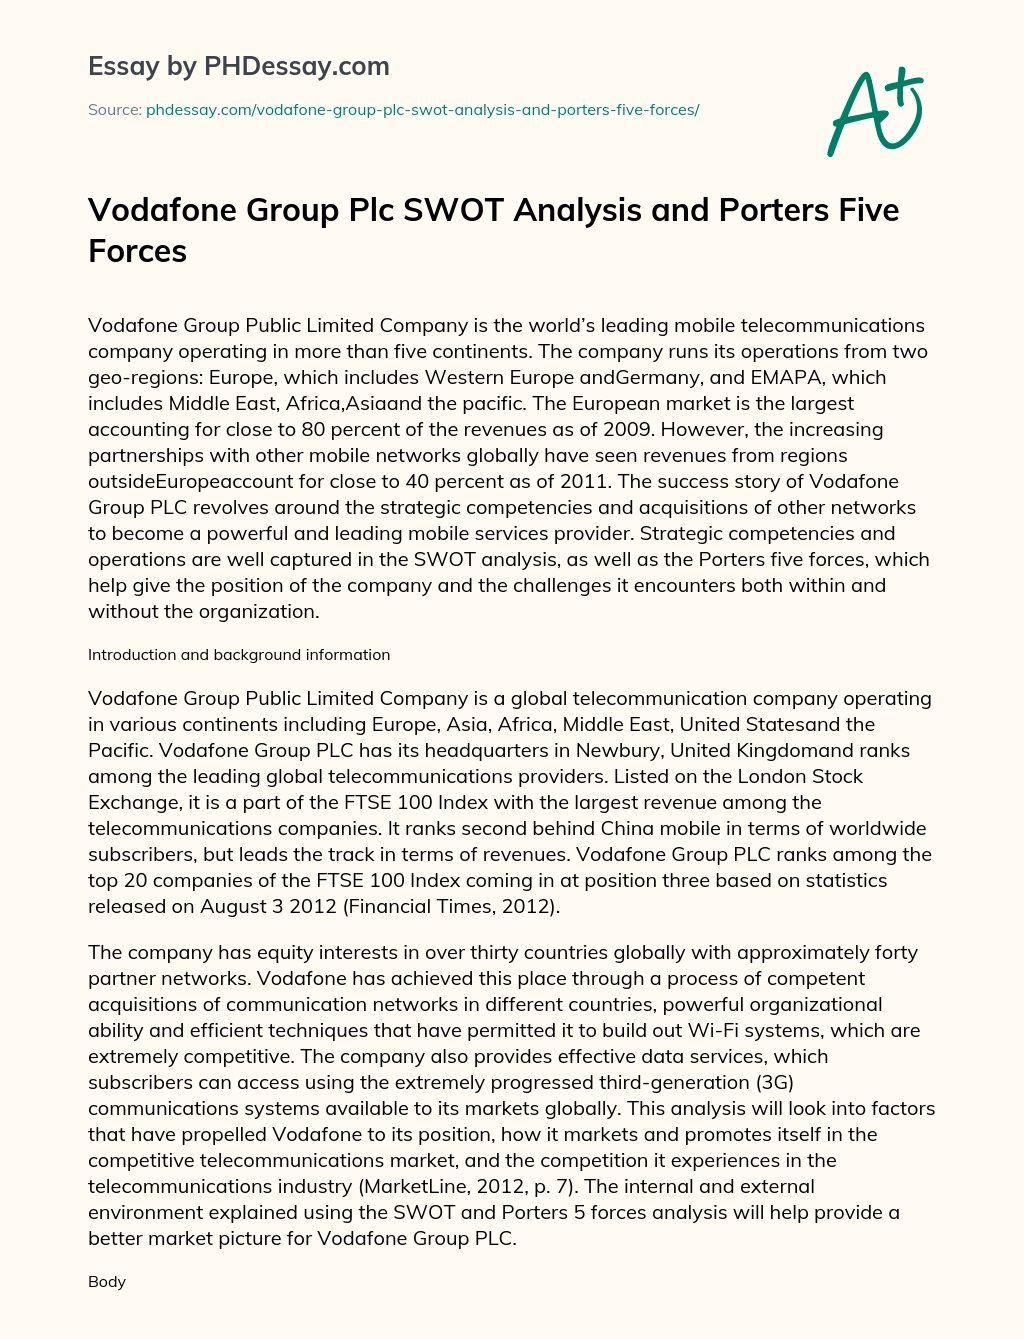 Vodafone Group Plc SWOT Analysis and Porters Five Forces essay